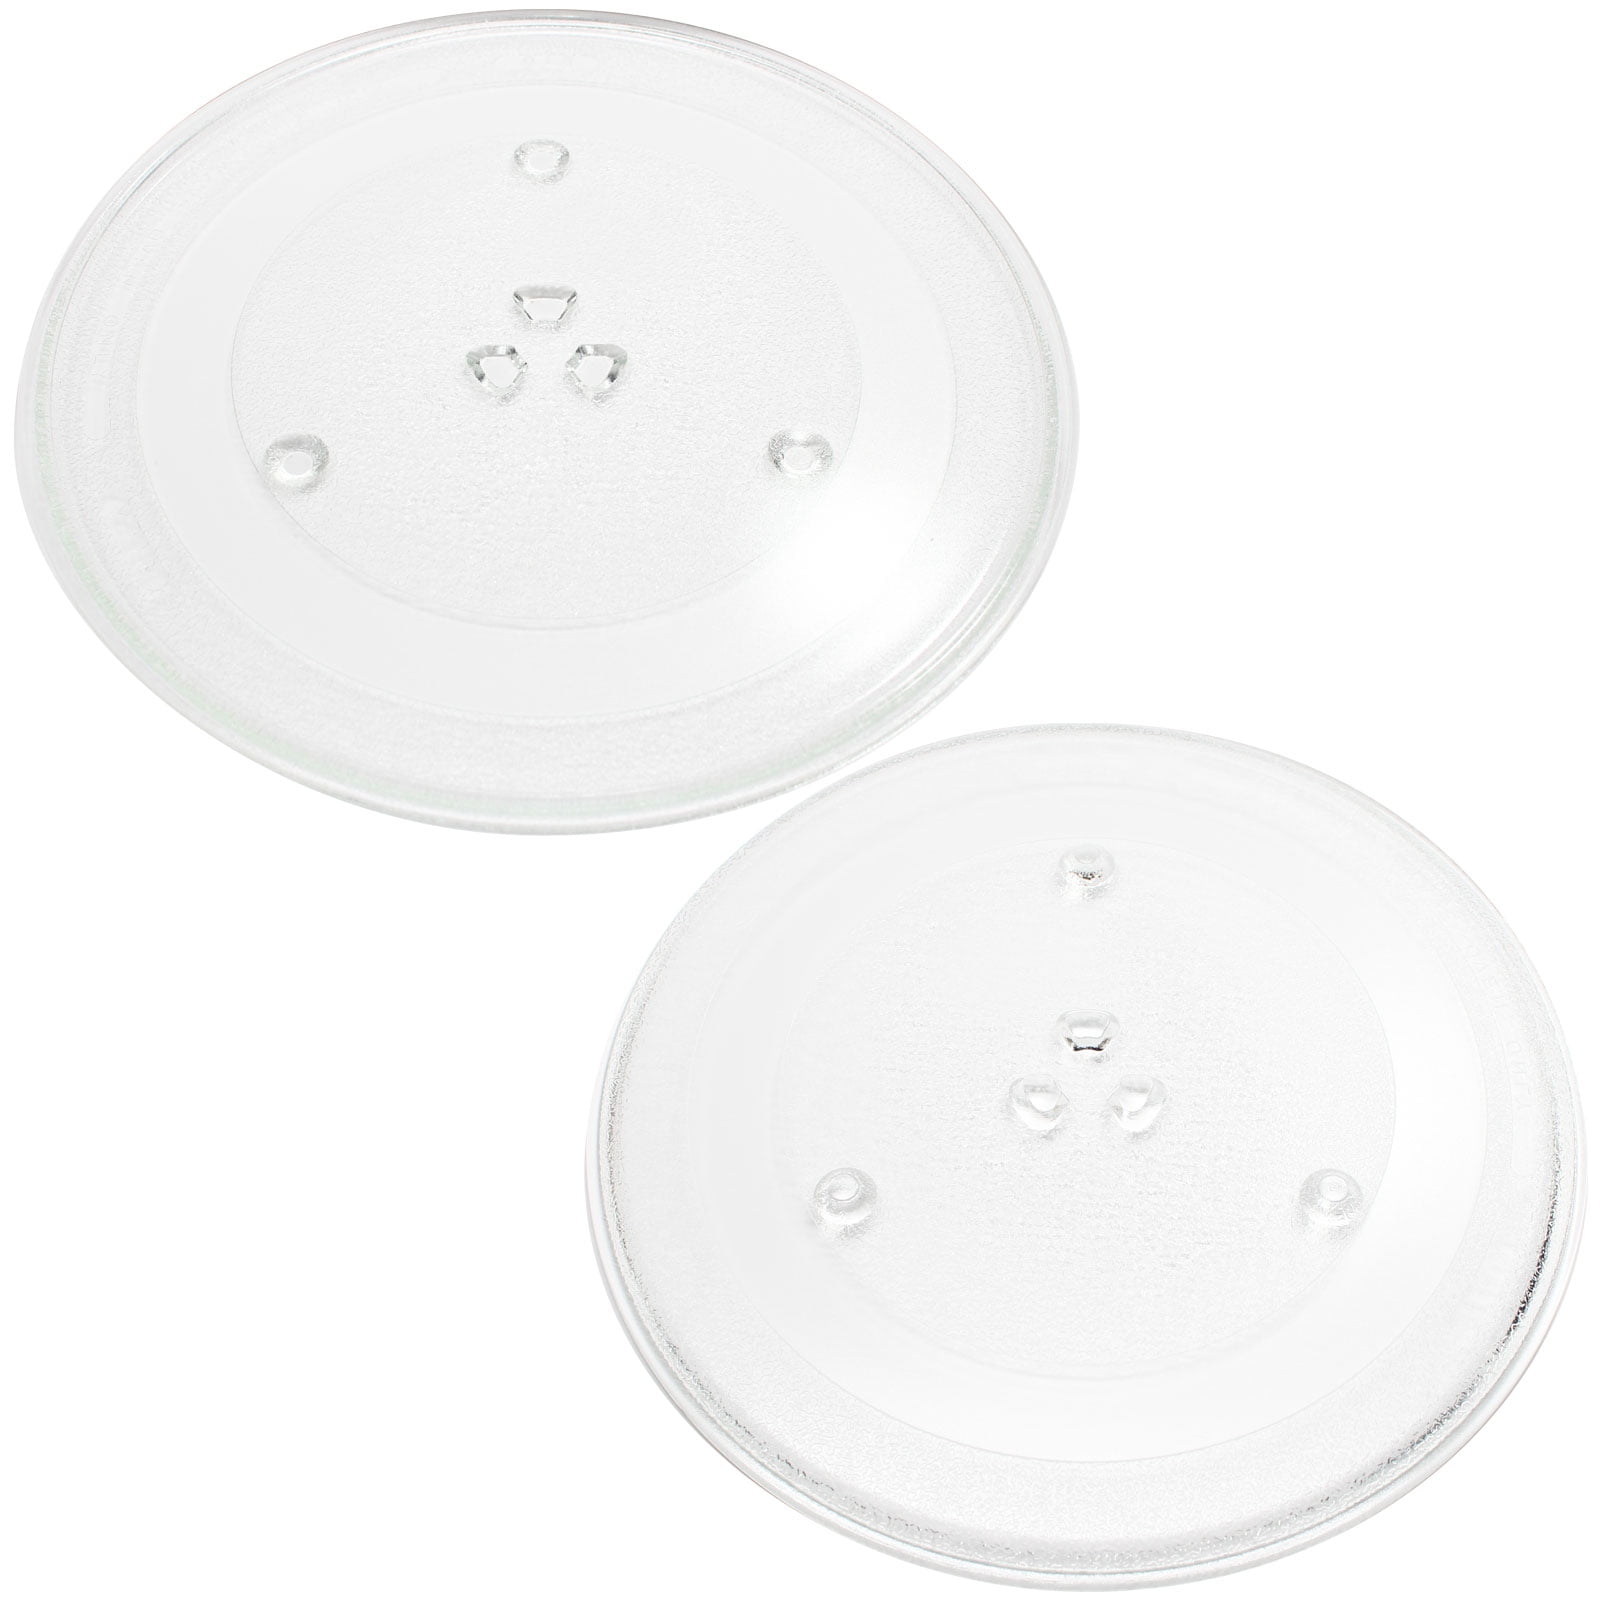 Replacement Magic Chef MCO165UW Microwave Glass Plate Compatible Magic Chef 203500 Microwave Glass Turntable Tray 11 1//4 285mm